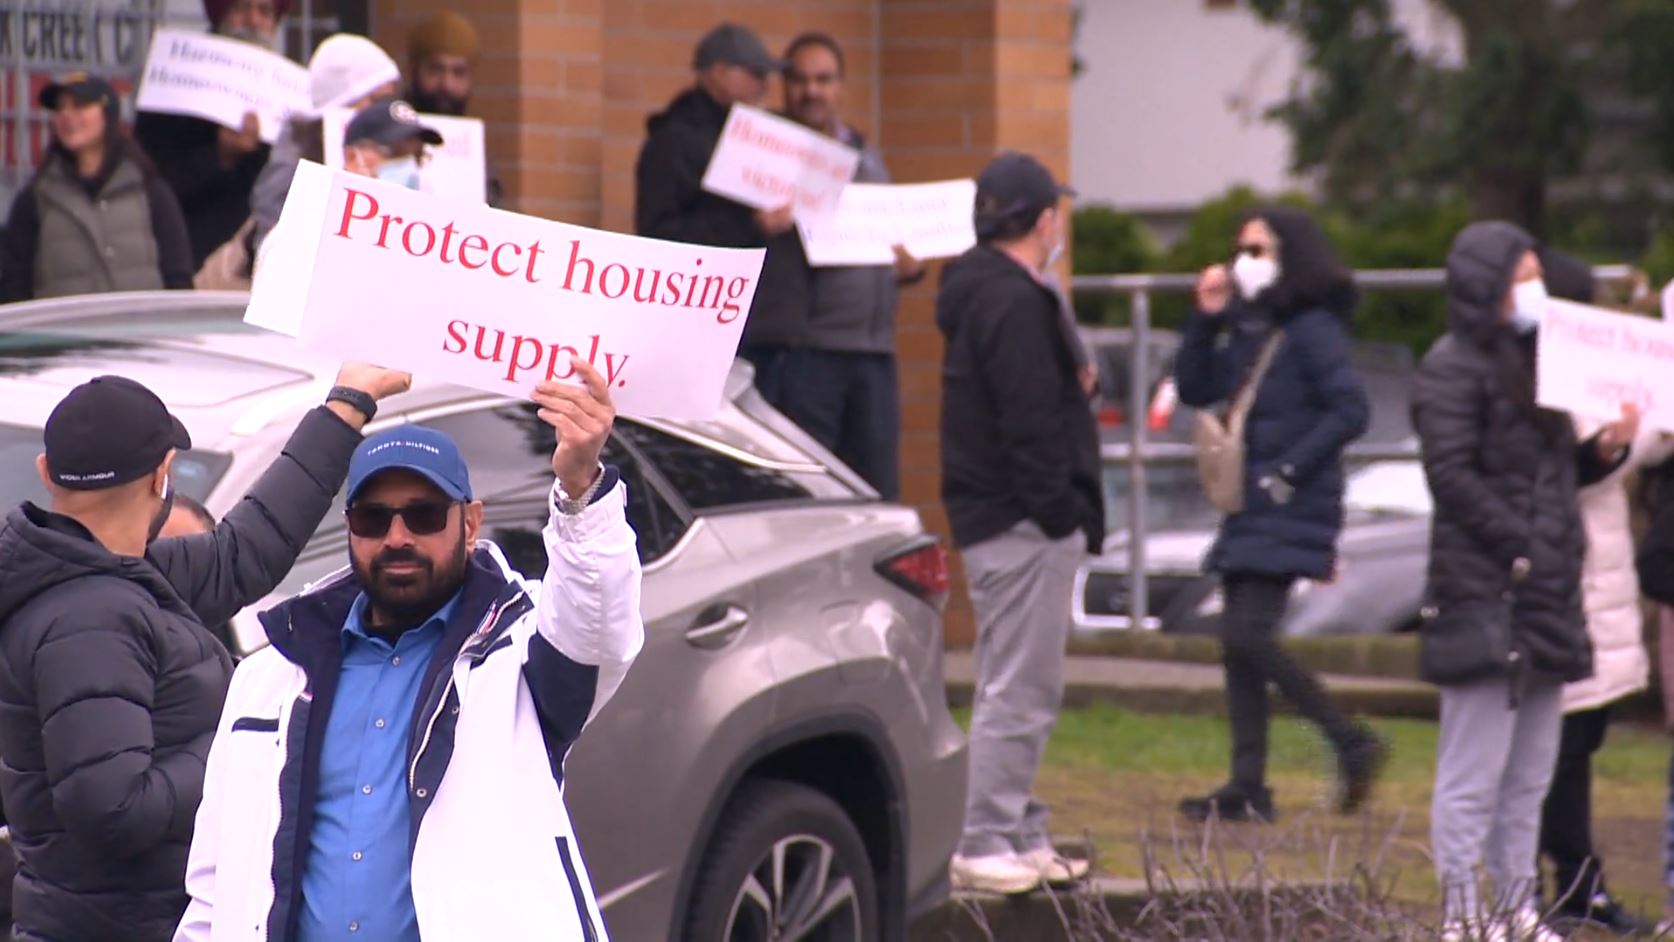 ‘We are united‘: Hundreds of B.C. landlords rally in support of petition